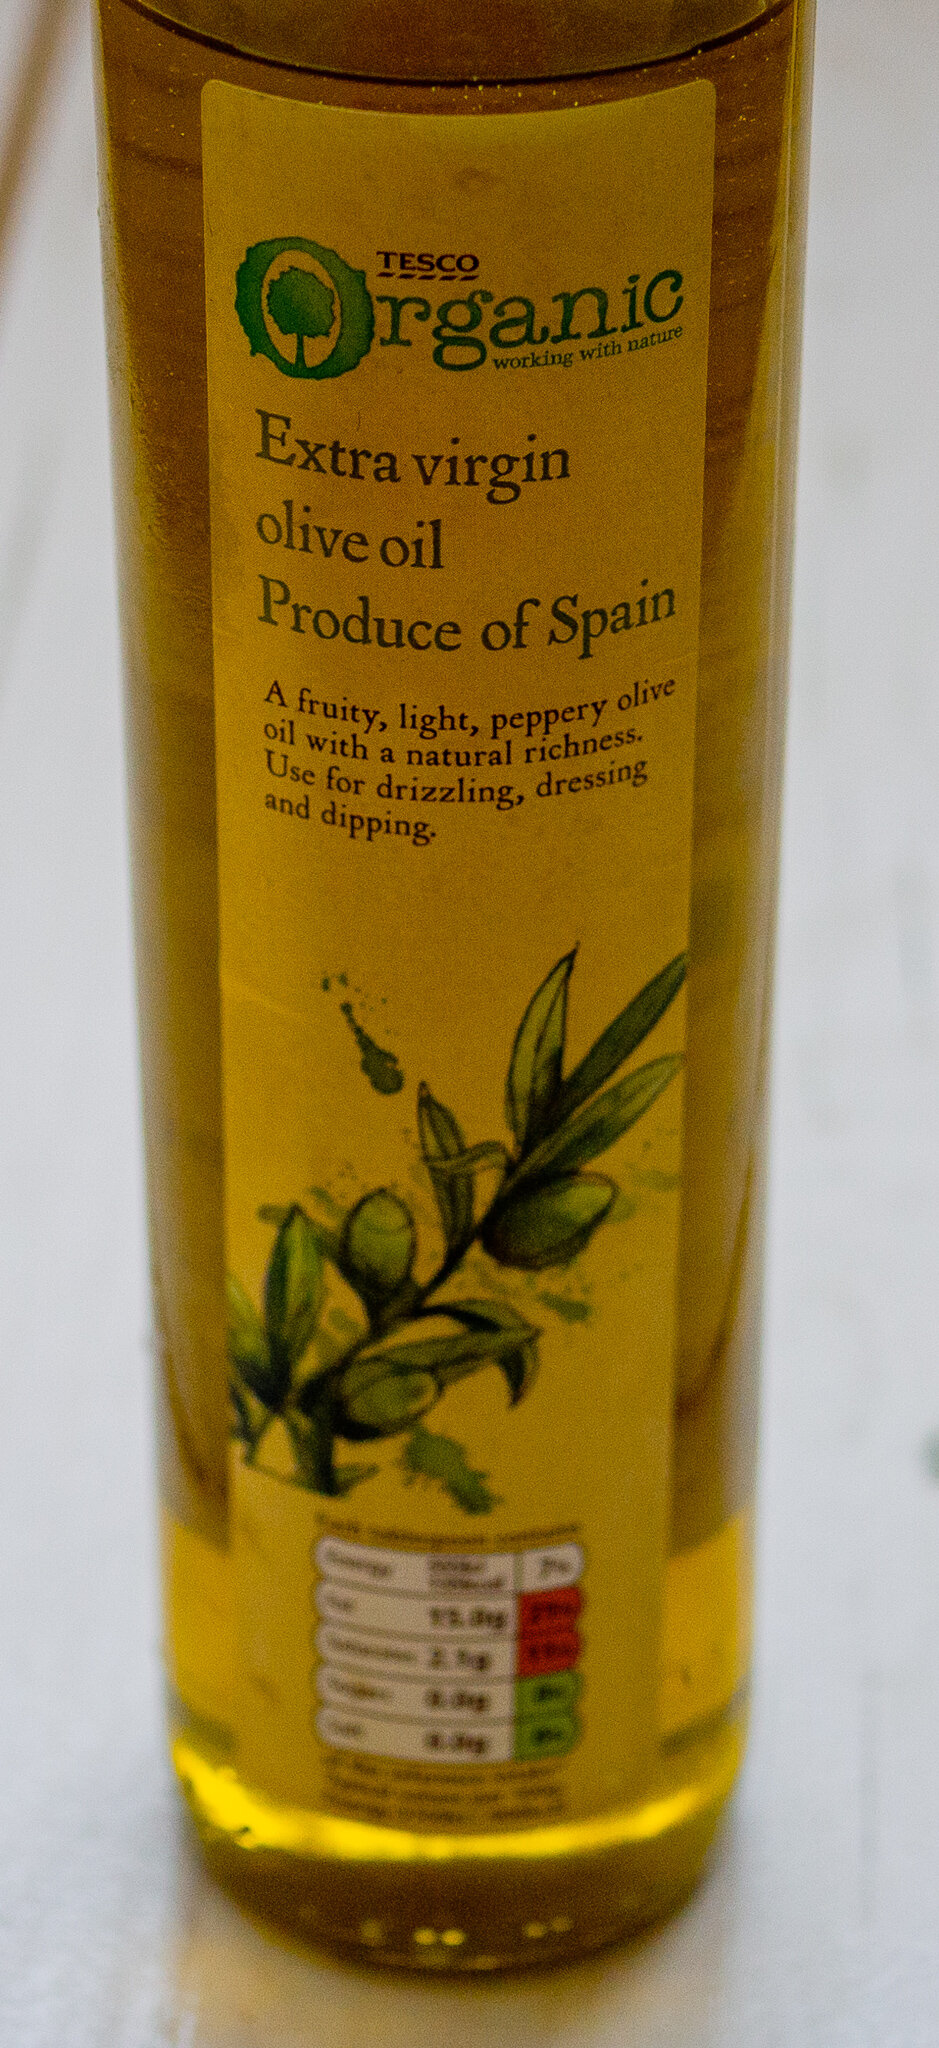 Organic olive oil from tescos